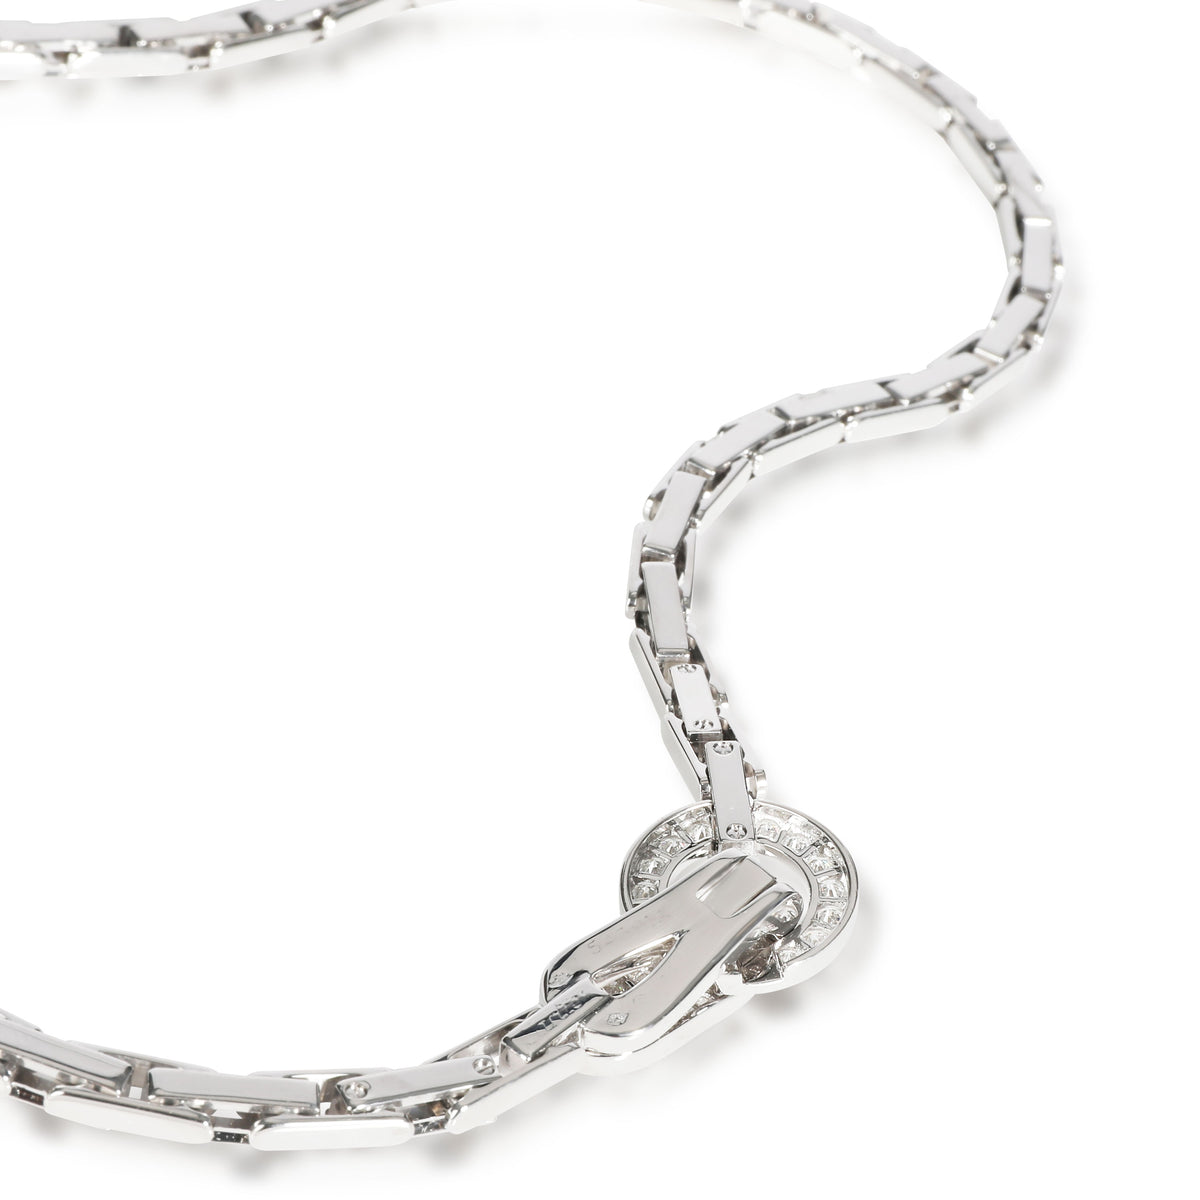 Cartier Agrafe Diamond Necklace in 18K White Gold 1.10 CTW